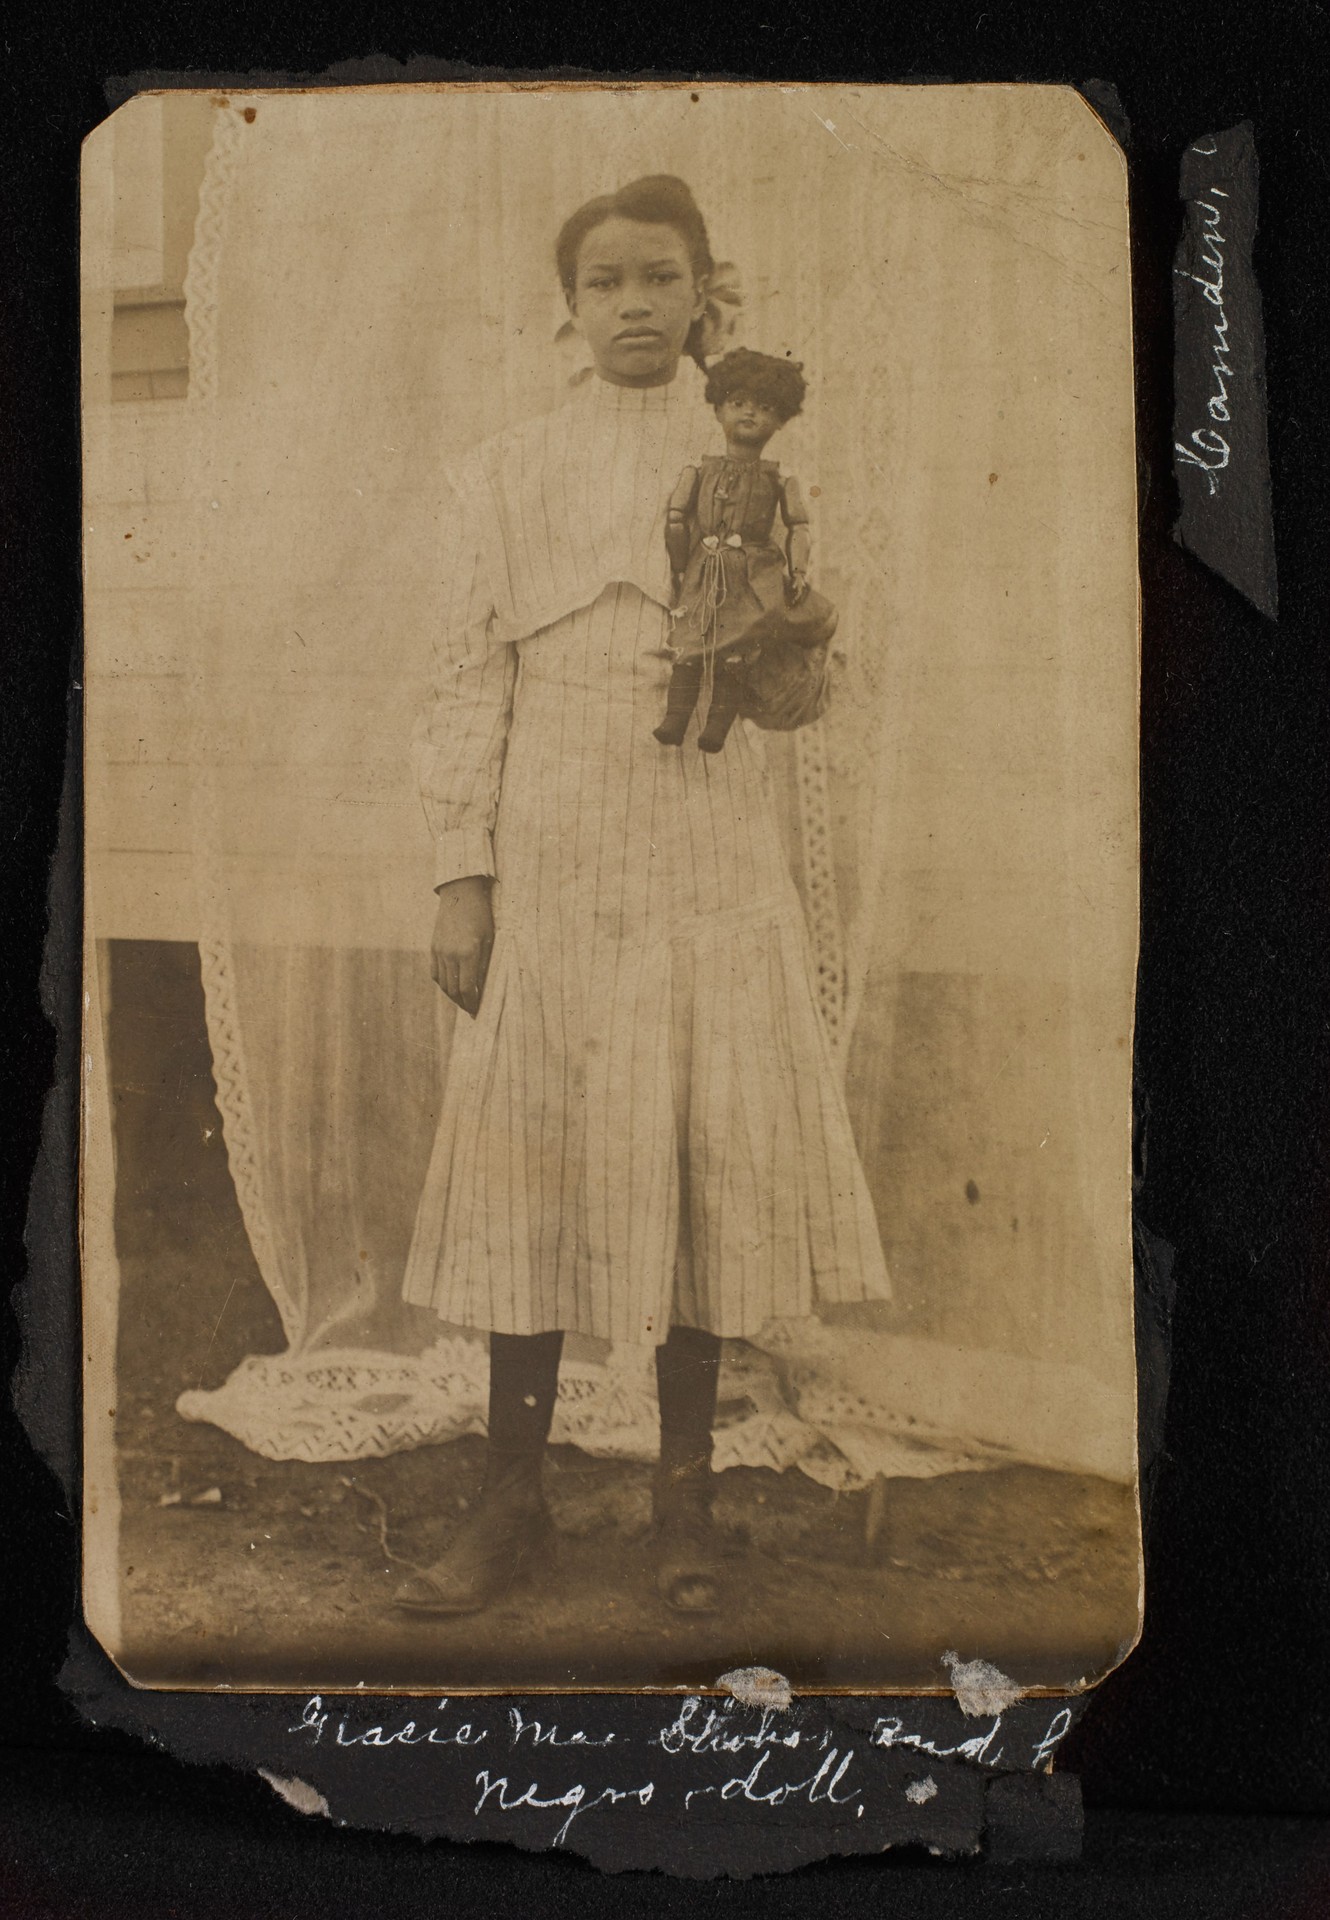 Unidentified photographer, Gelatin silver print mounted on album page, Camden, AR, ca. 1910 Inscribed on page: “Gracie Mae [Hicks] and her Negro doll” and “Camden.”